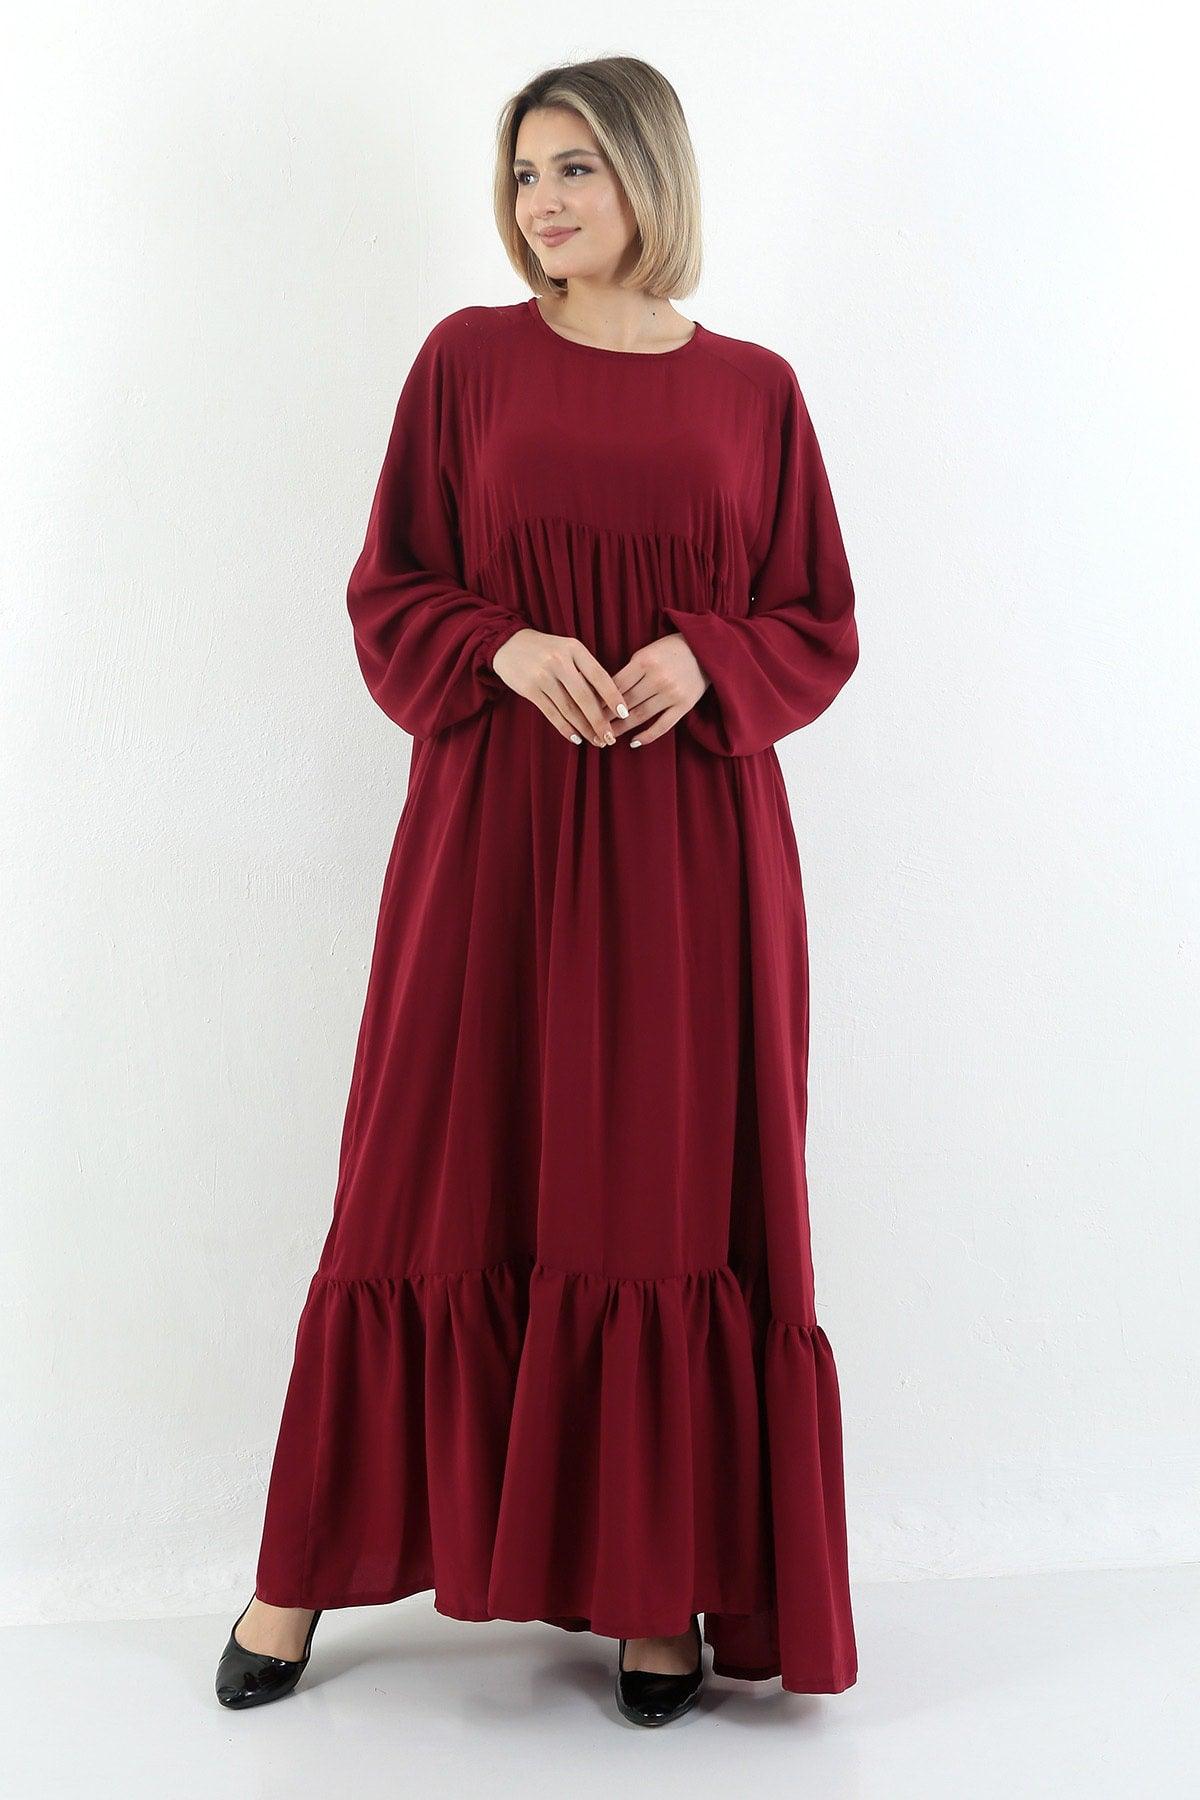 Claret Red Crew Neck Relaxed Fit Elastic Sleeve Side Pockets Pleated Robe Dress - Swordslife